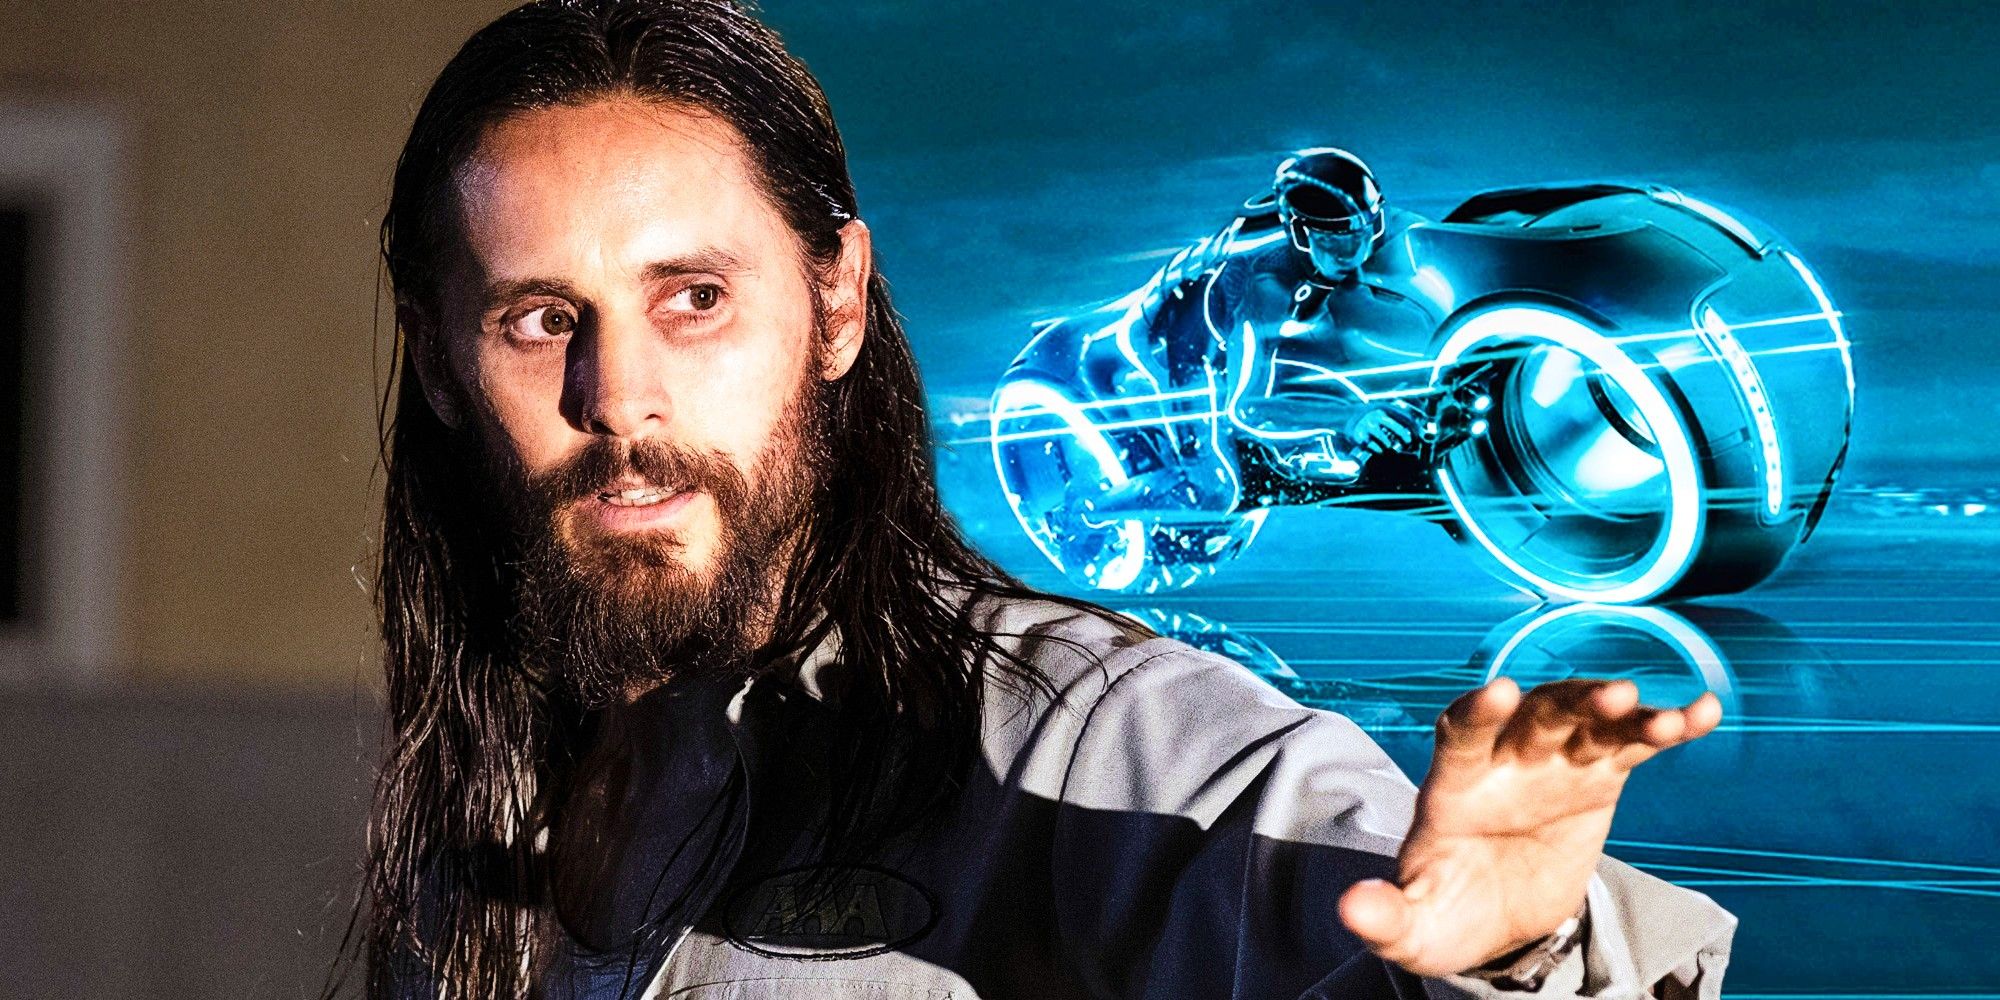 Why Jared Leto's Tron 3 Casting Is So Divisive